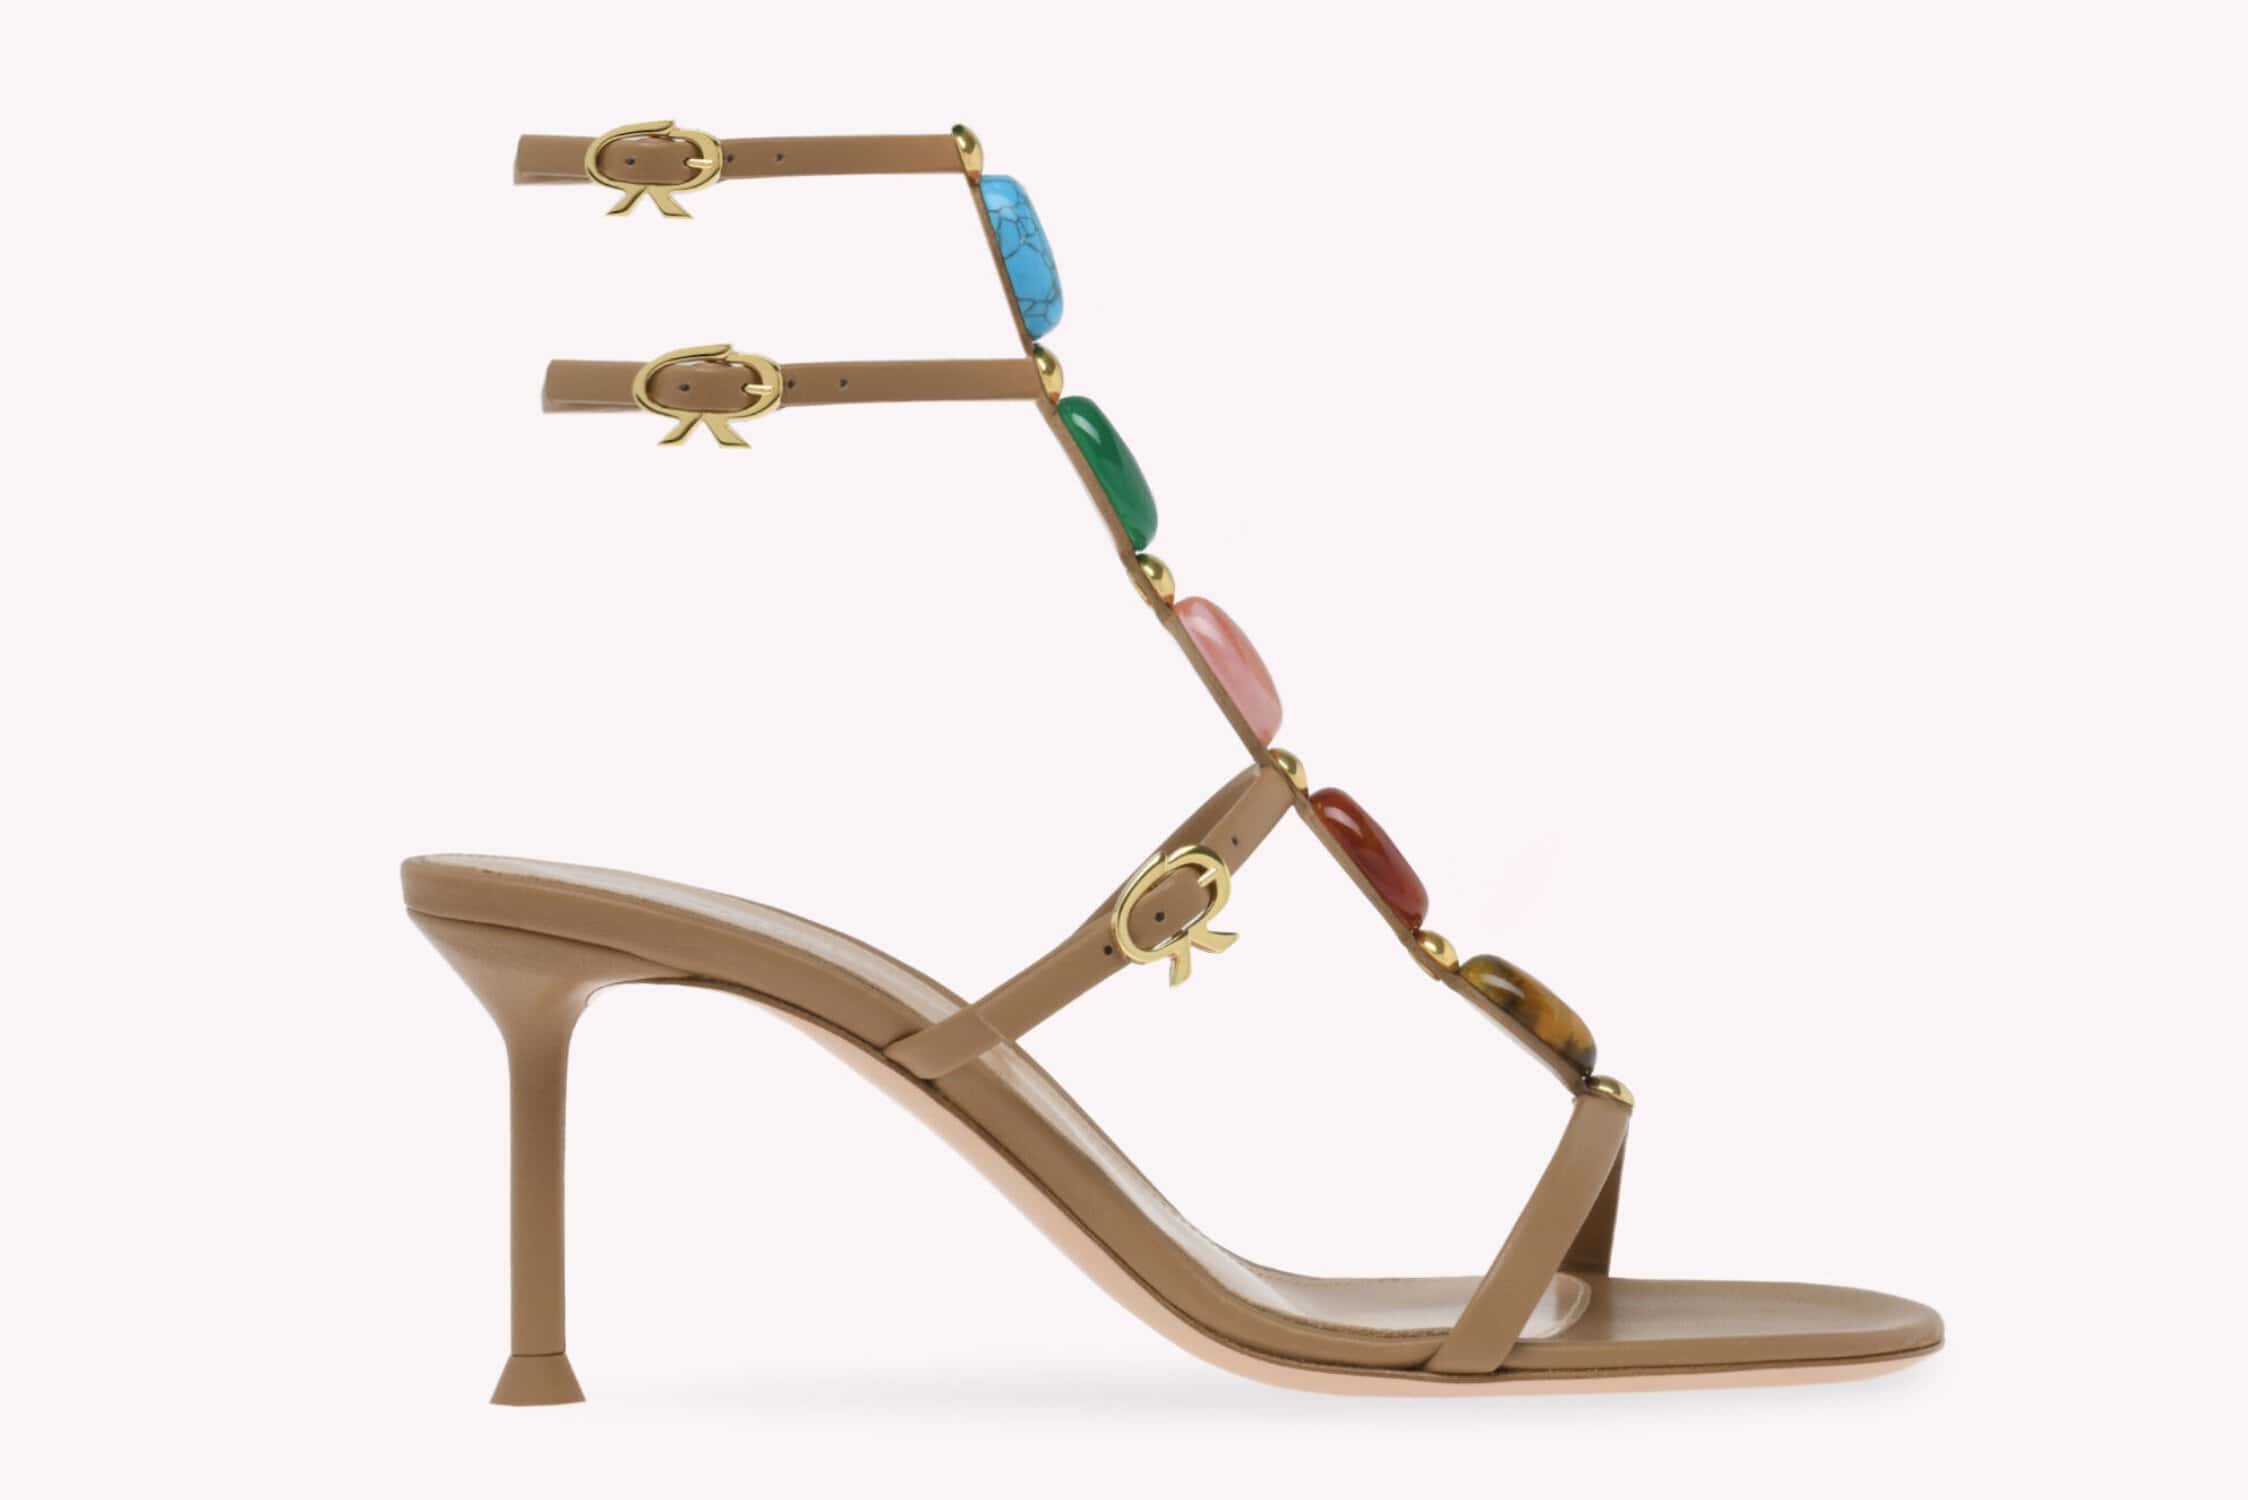 Mother's Day, gift guide, Mother's Day gifts, Gianvito Rossi